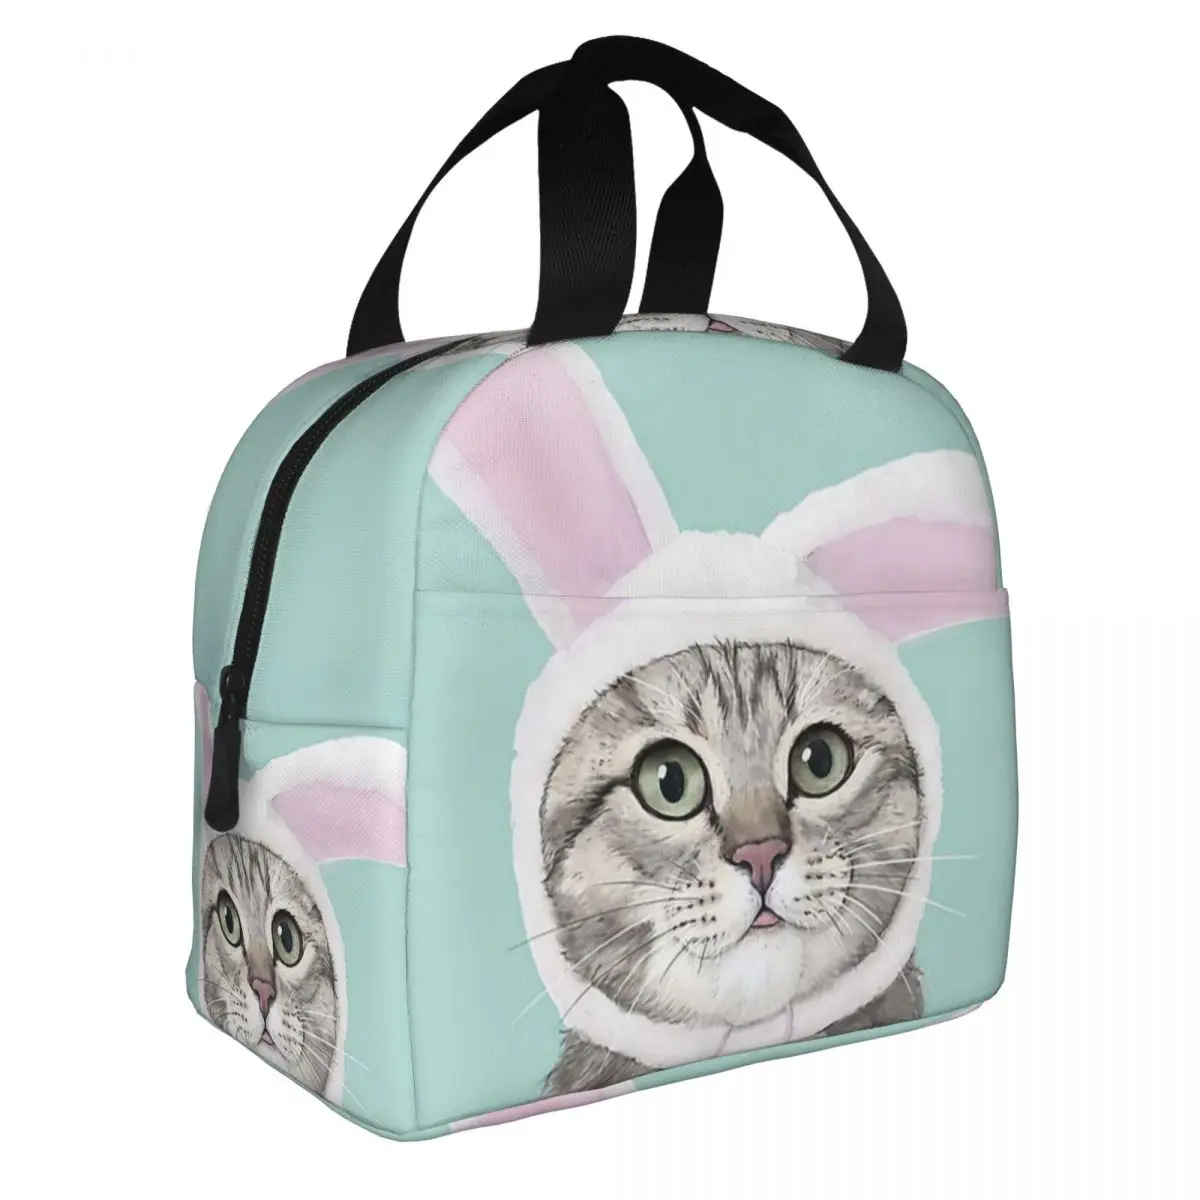 Floating Cat Bunny Lunch Bento Bags Portable Aluminum Foil thickened Thermal Cloth Lunch Bag for Women Men Boy